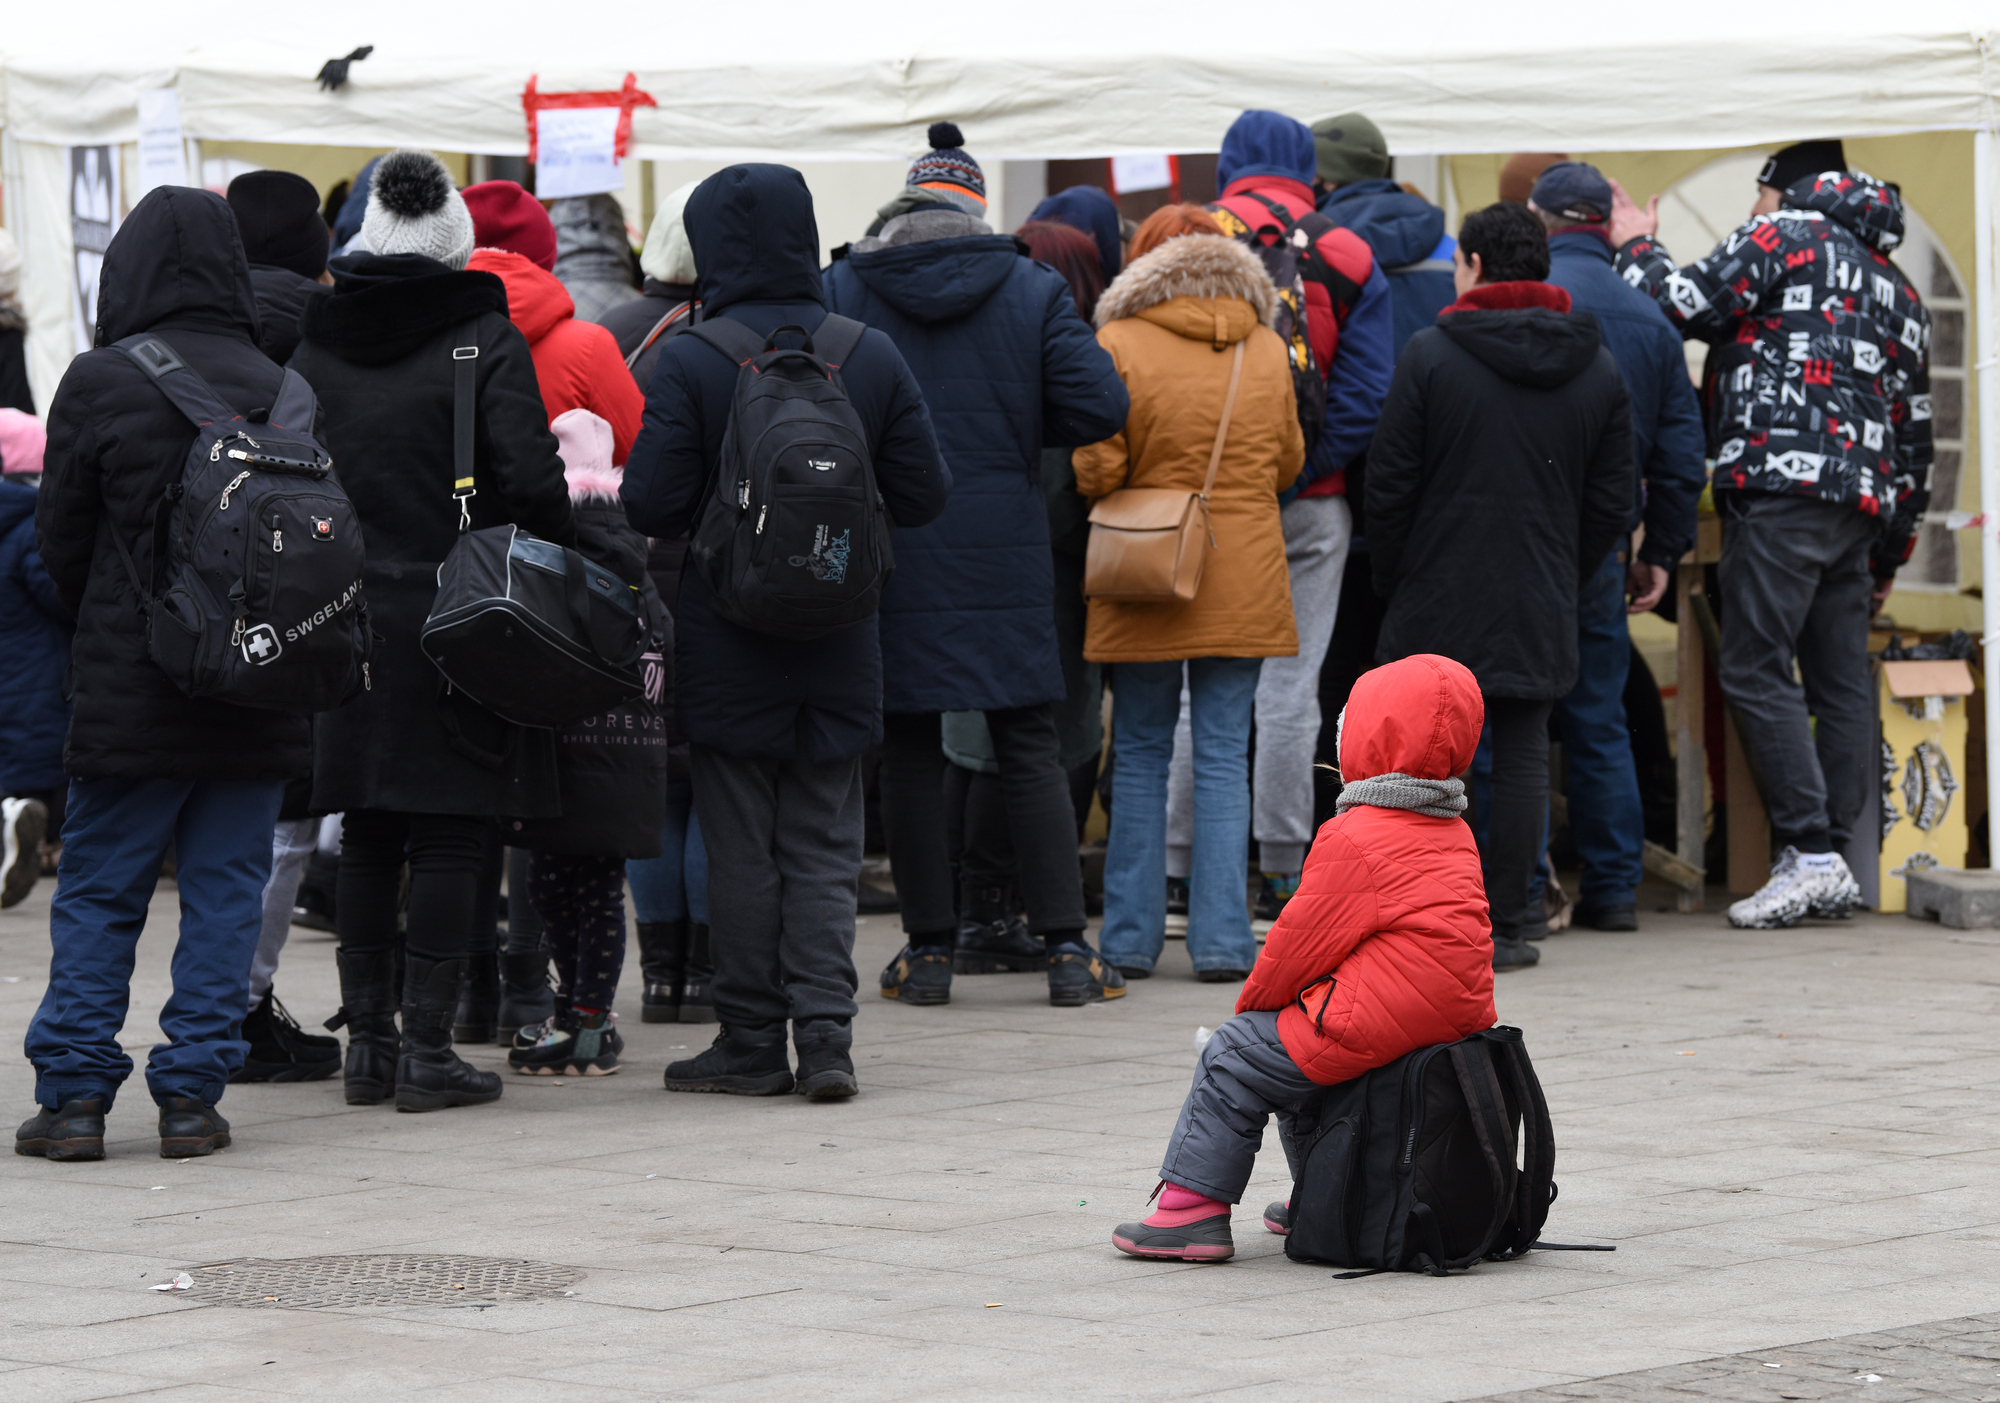 Child in red jacket sits on suitcase near line of evacuees in Lviv, Ukraine